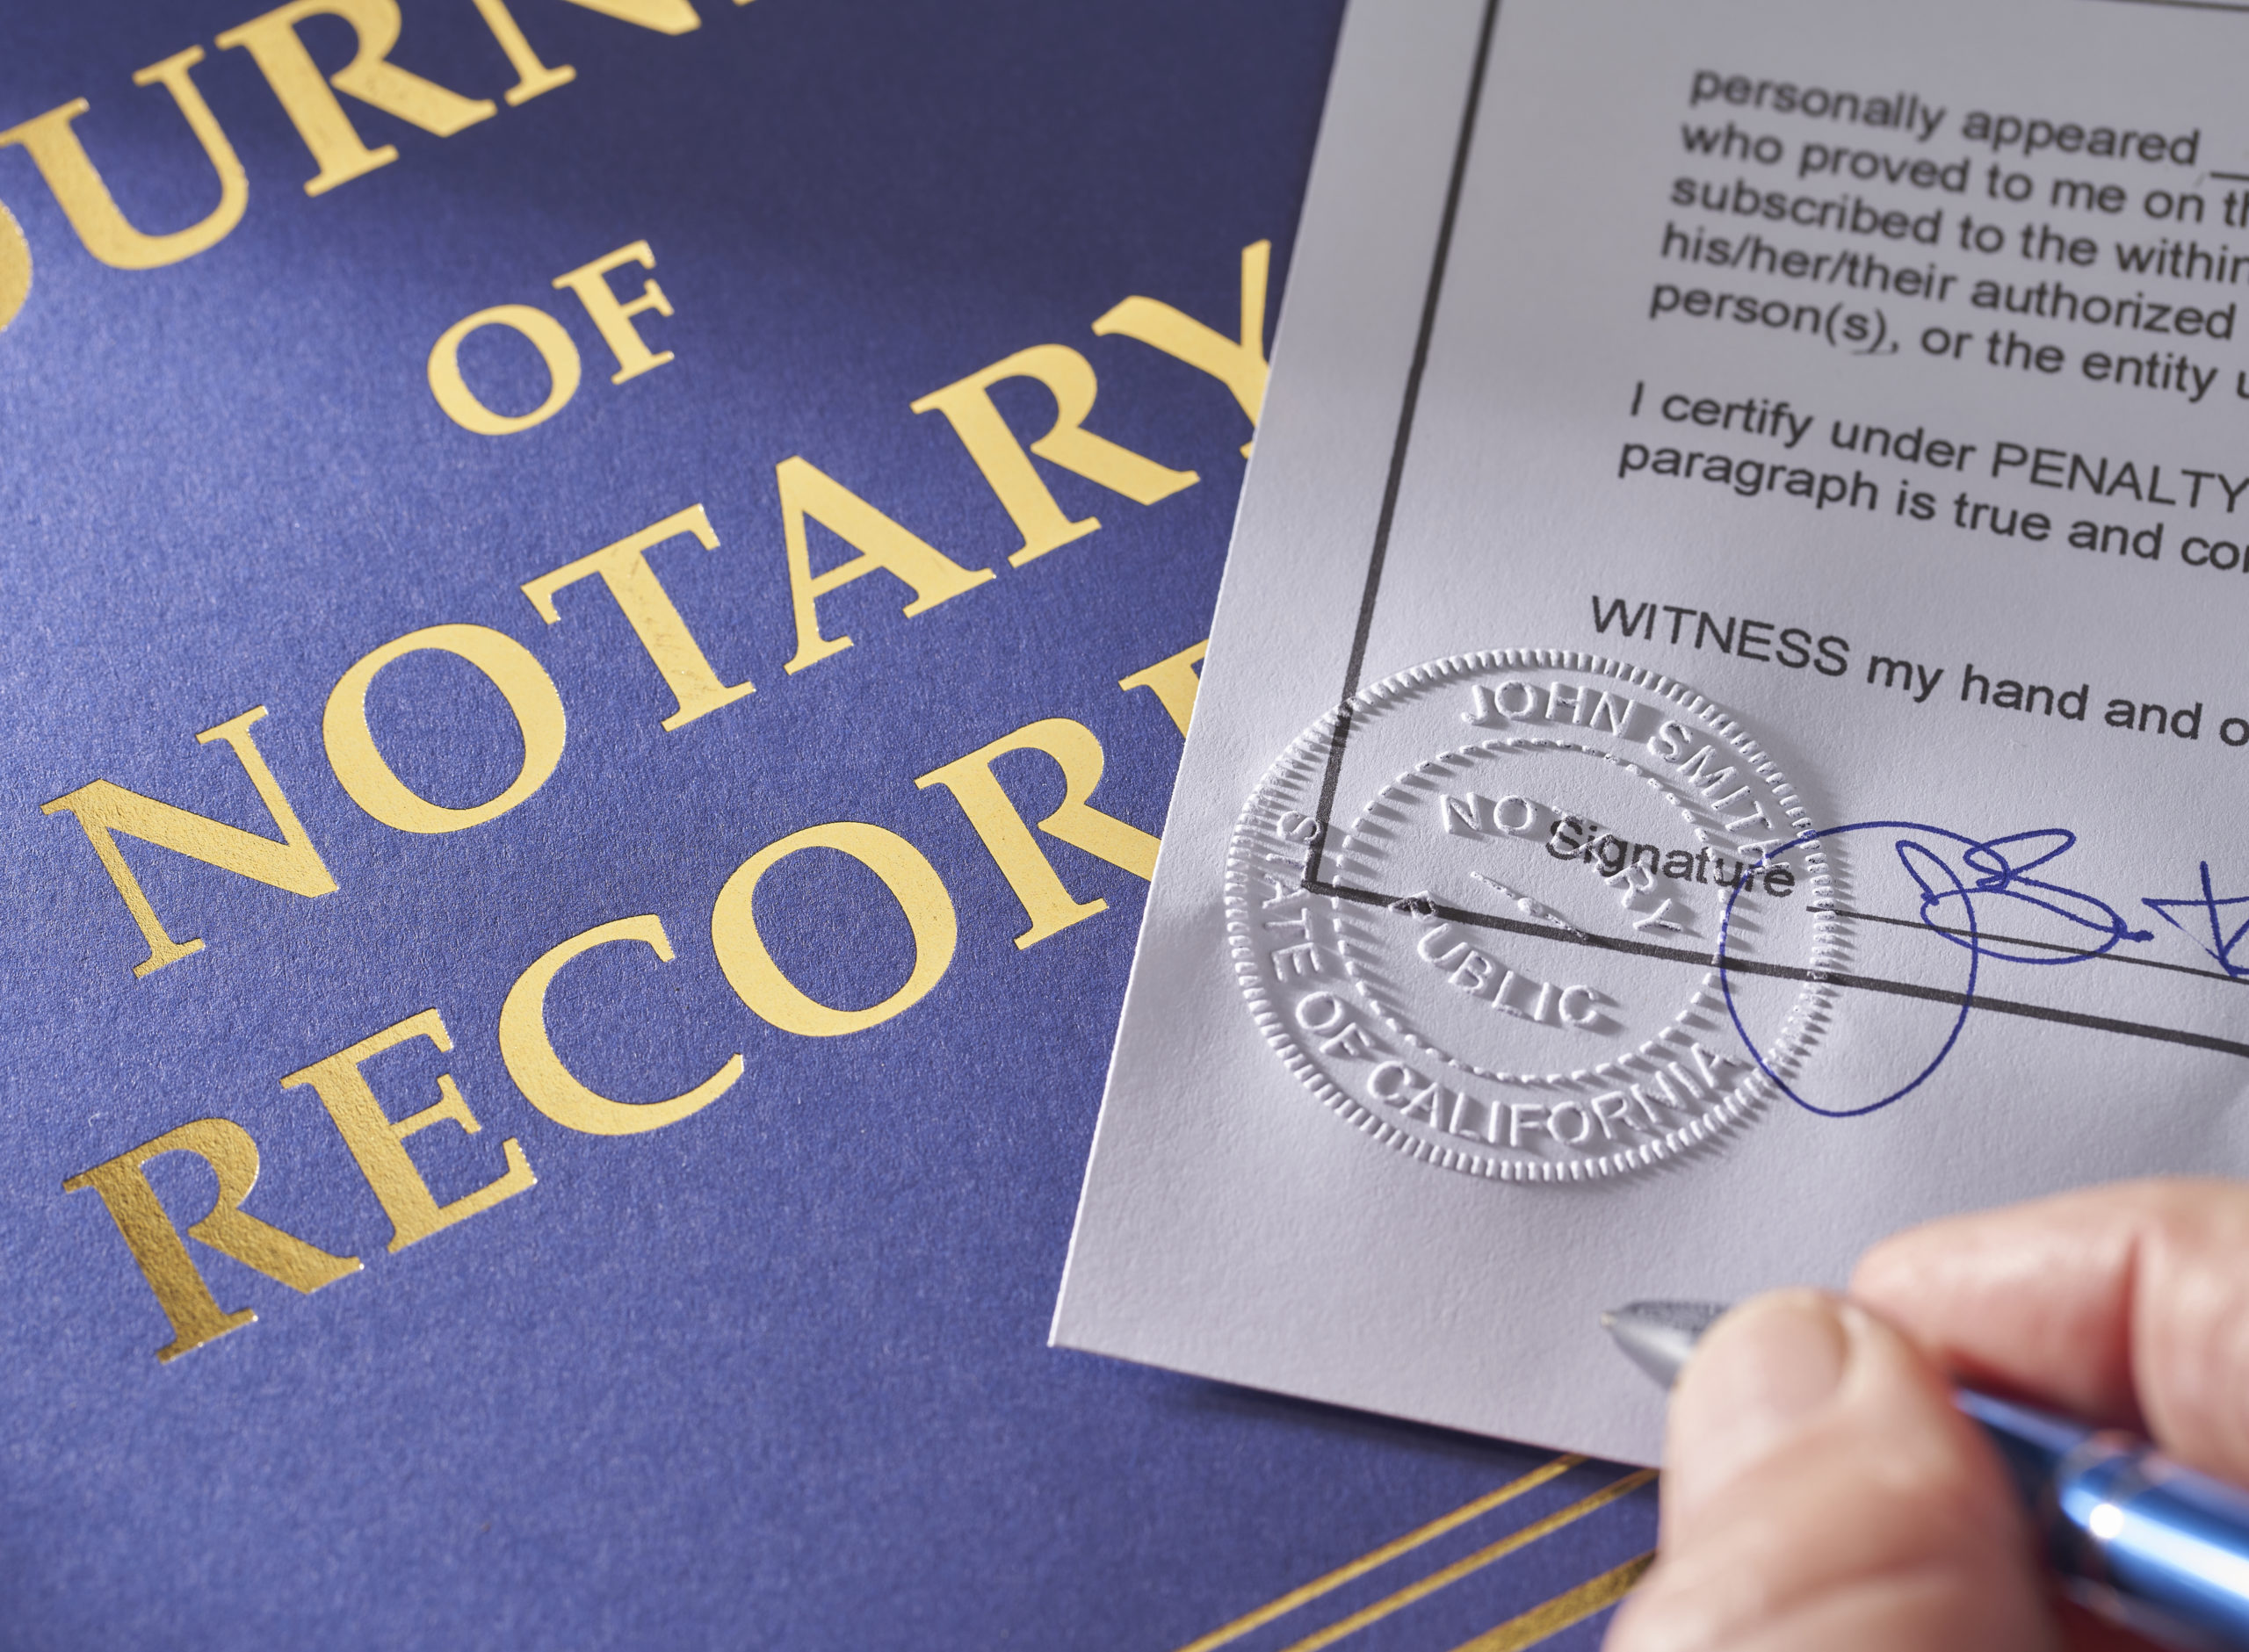 Picture of notary paperwork.